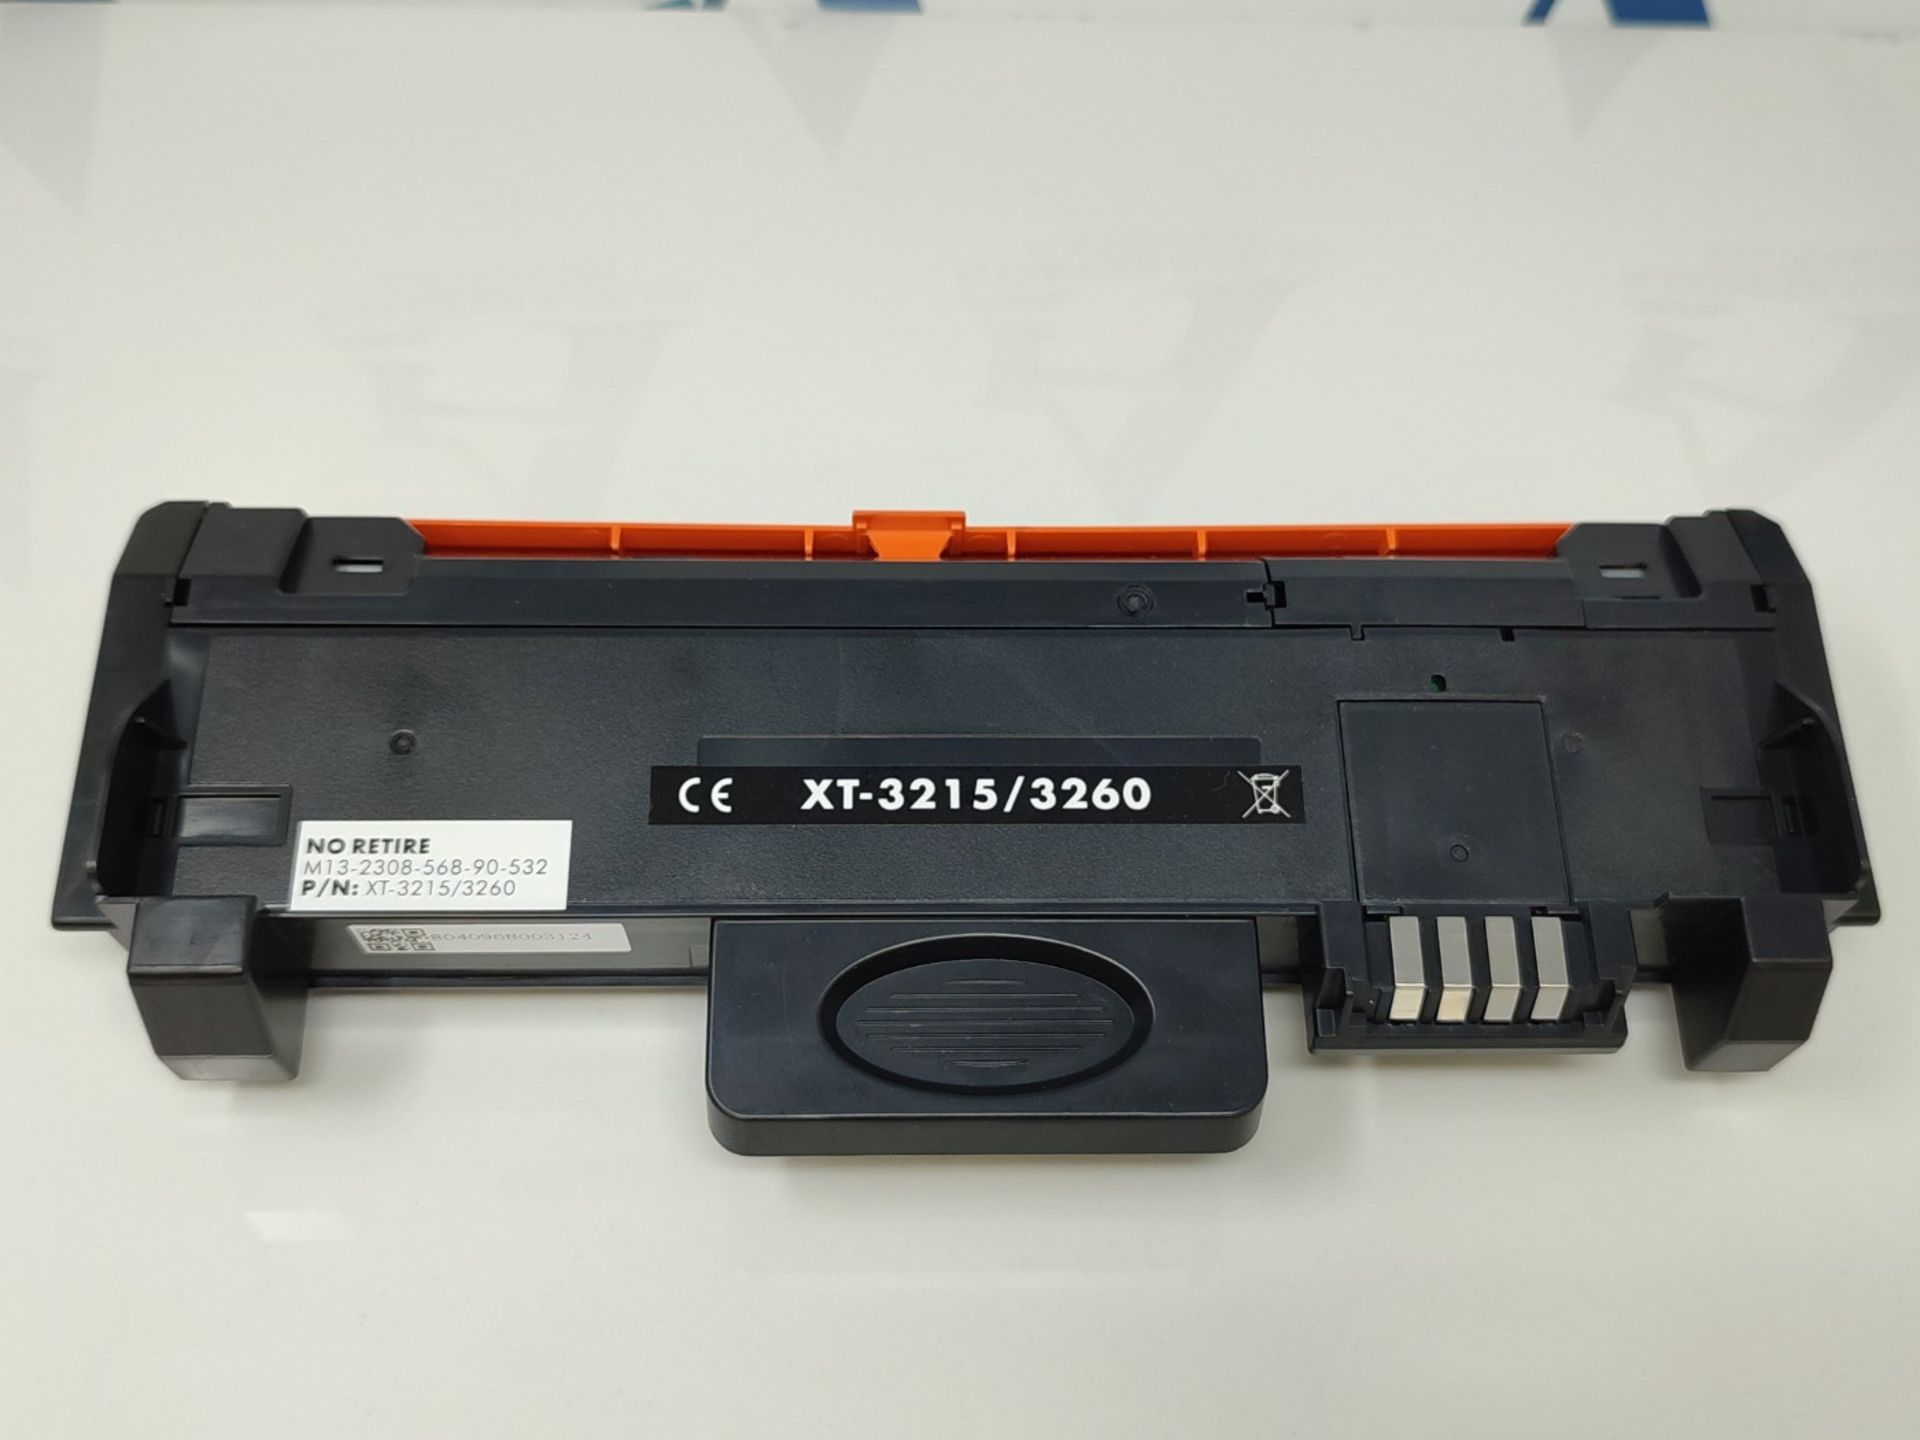 universo cartridge® 106R02777 Compatible Toner Cartridge for Xerox Phaser 3052, 3260,